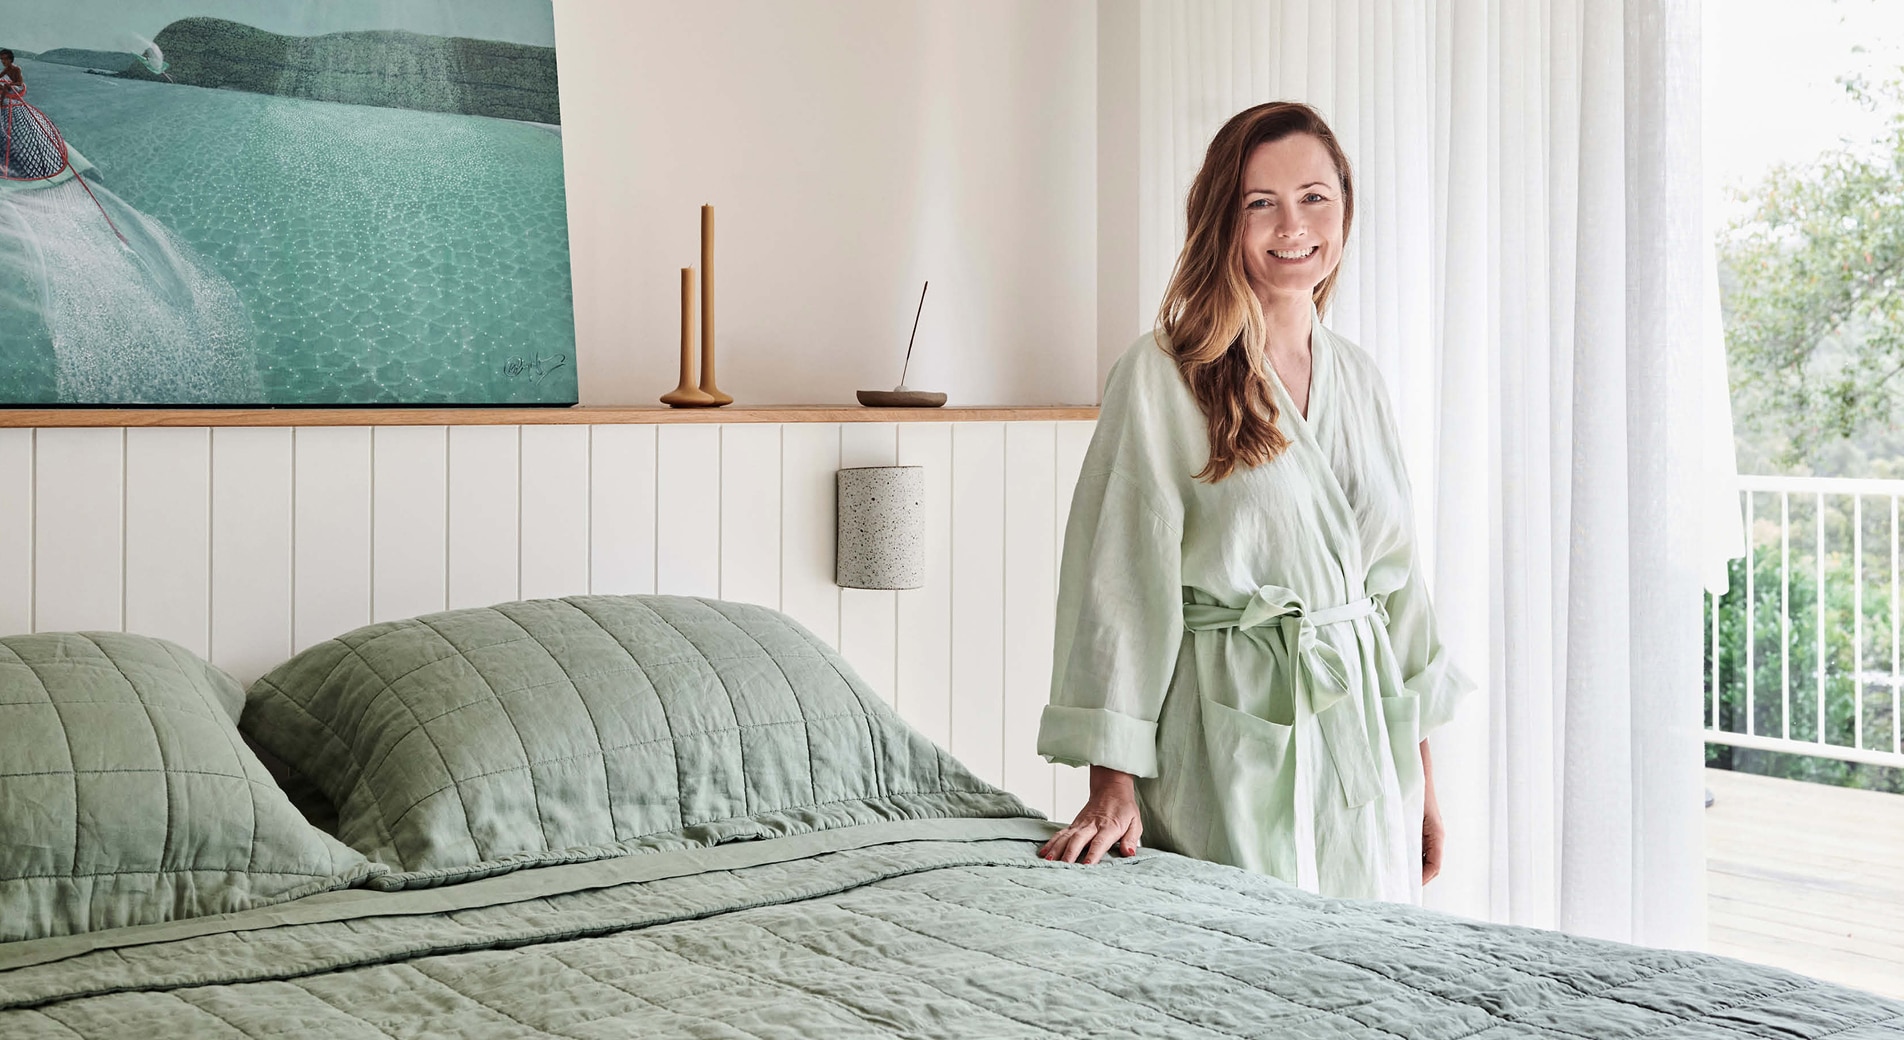 xanthe highfield, white woman with golden brown hair, stand next to her bed. she wears julip linen robe and is smiling, with hand on bed. bed is dressed in cactus abbotson linen.